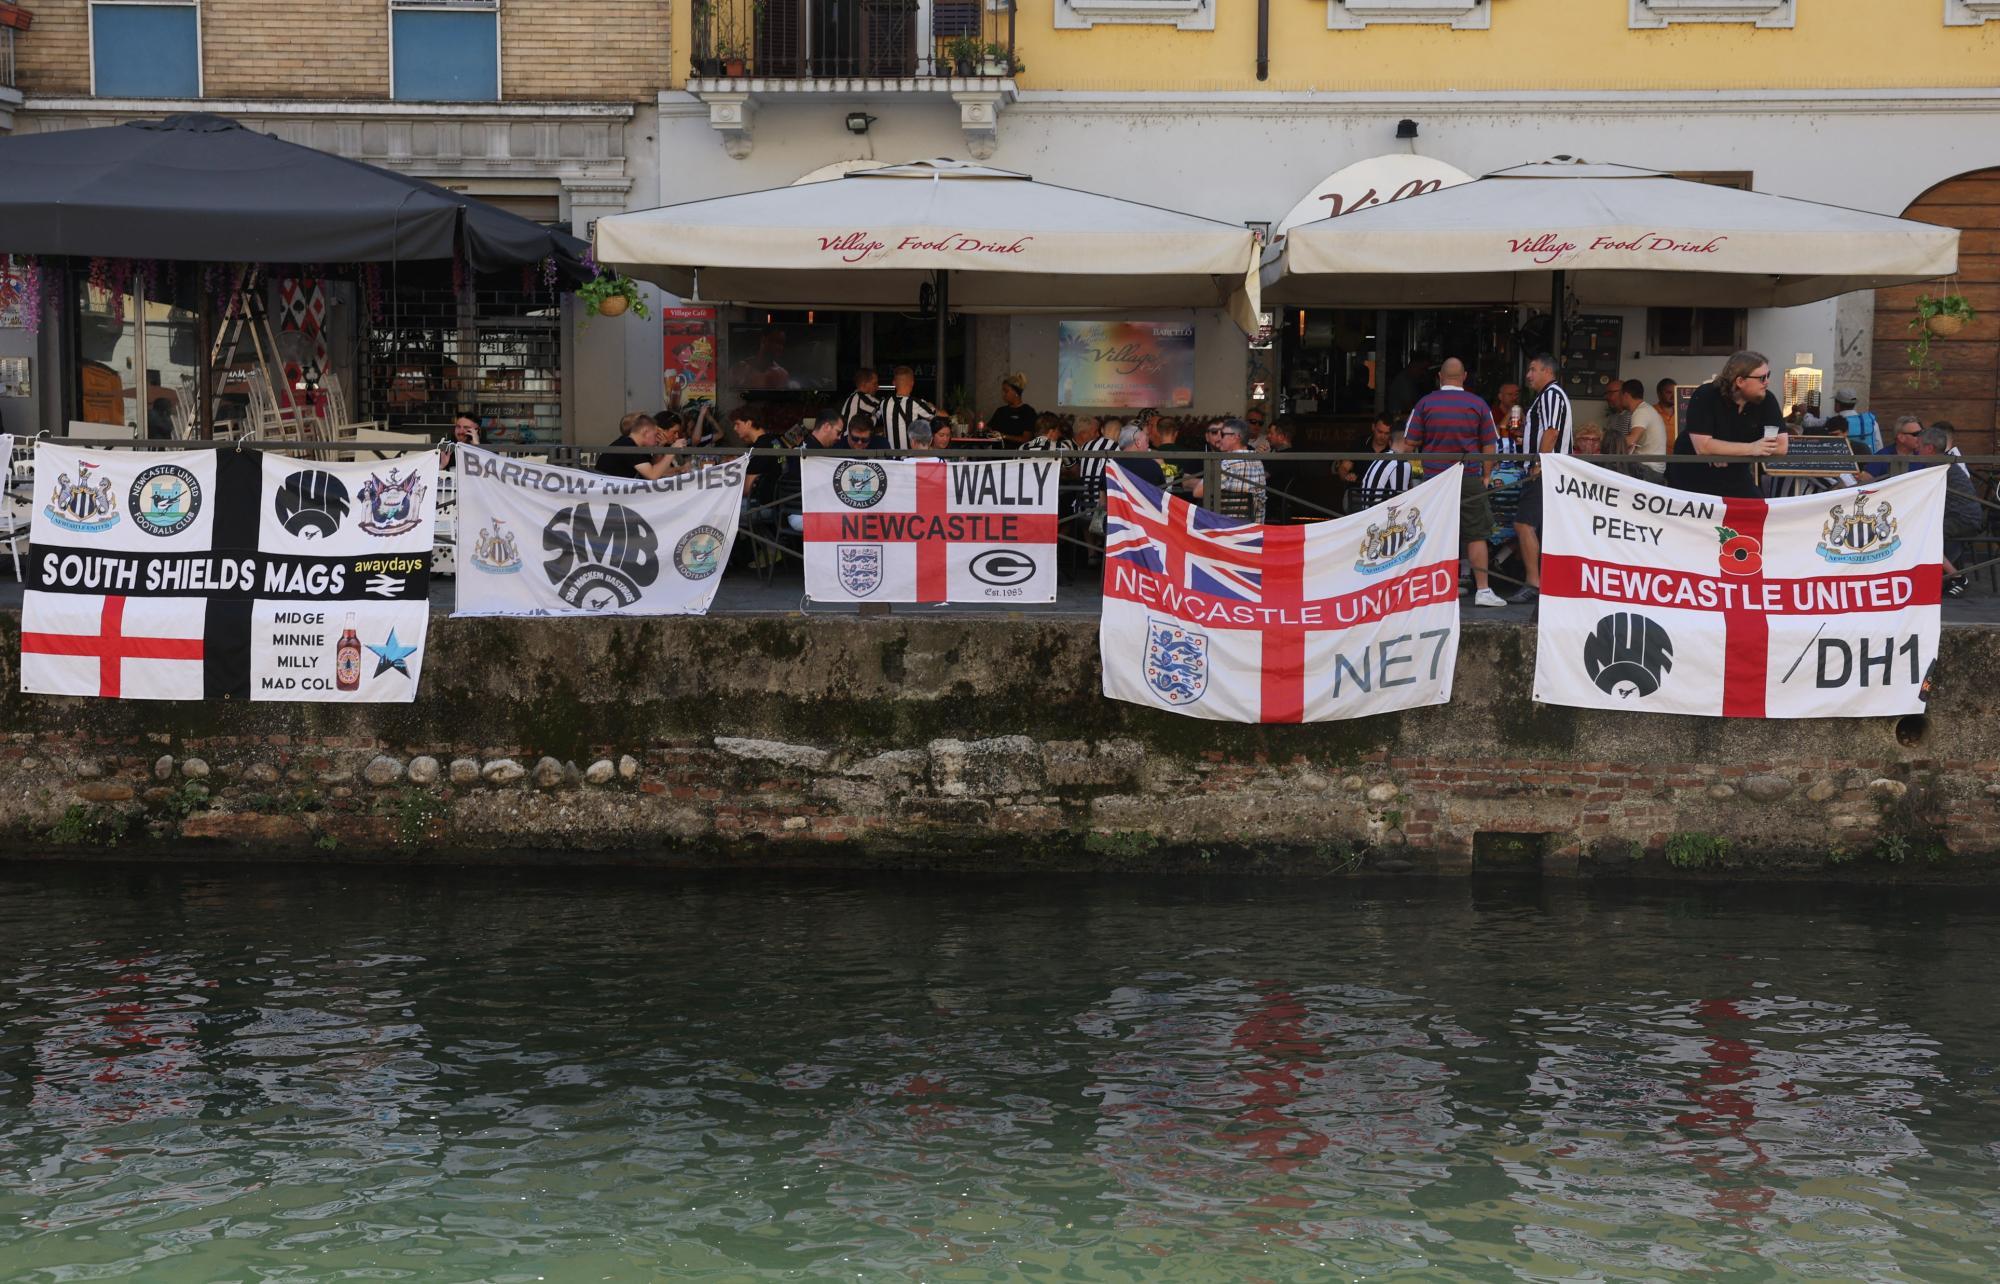 Champions League - Group F - Fans in Milan watch AC Milan v Newcastle United